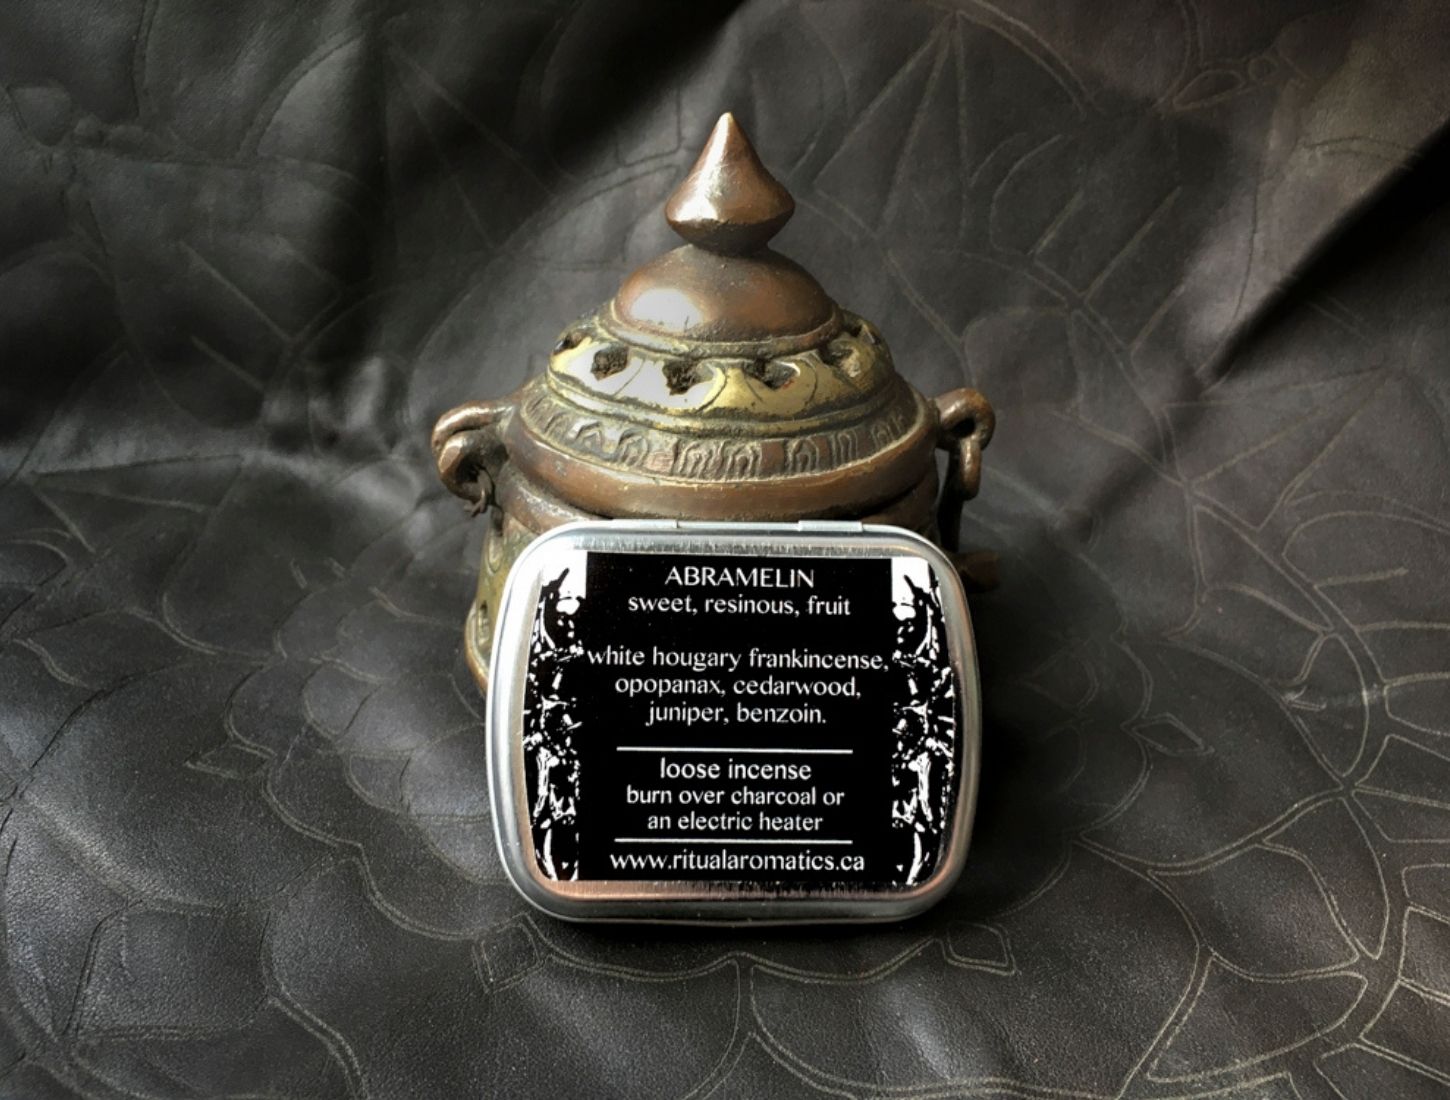 Back label of Ritual Aromatics Abramelin Loose Incense on gray leather in front of an antique brass incense burner